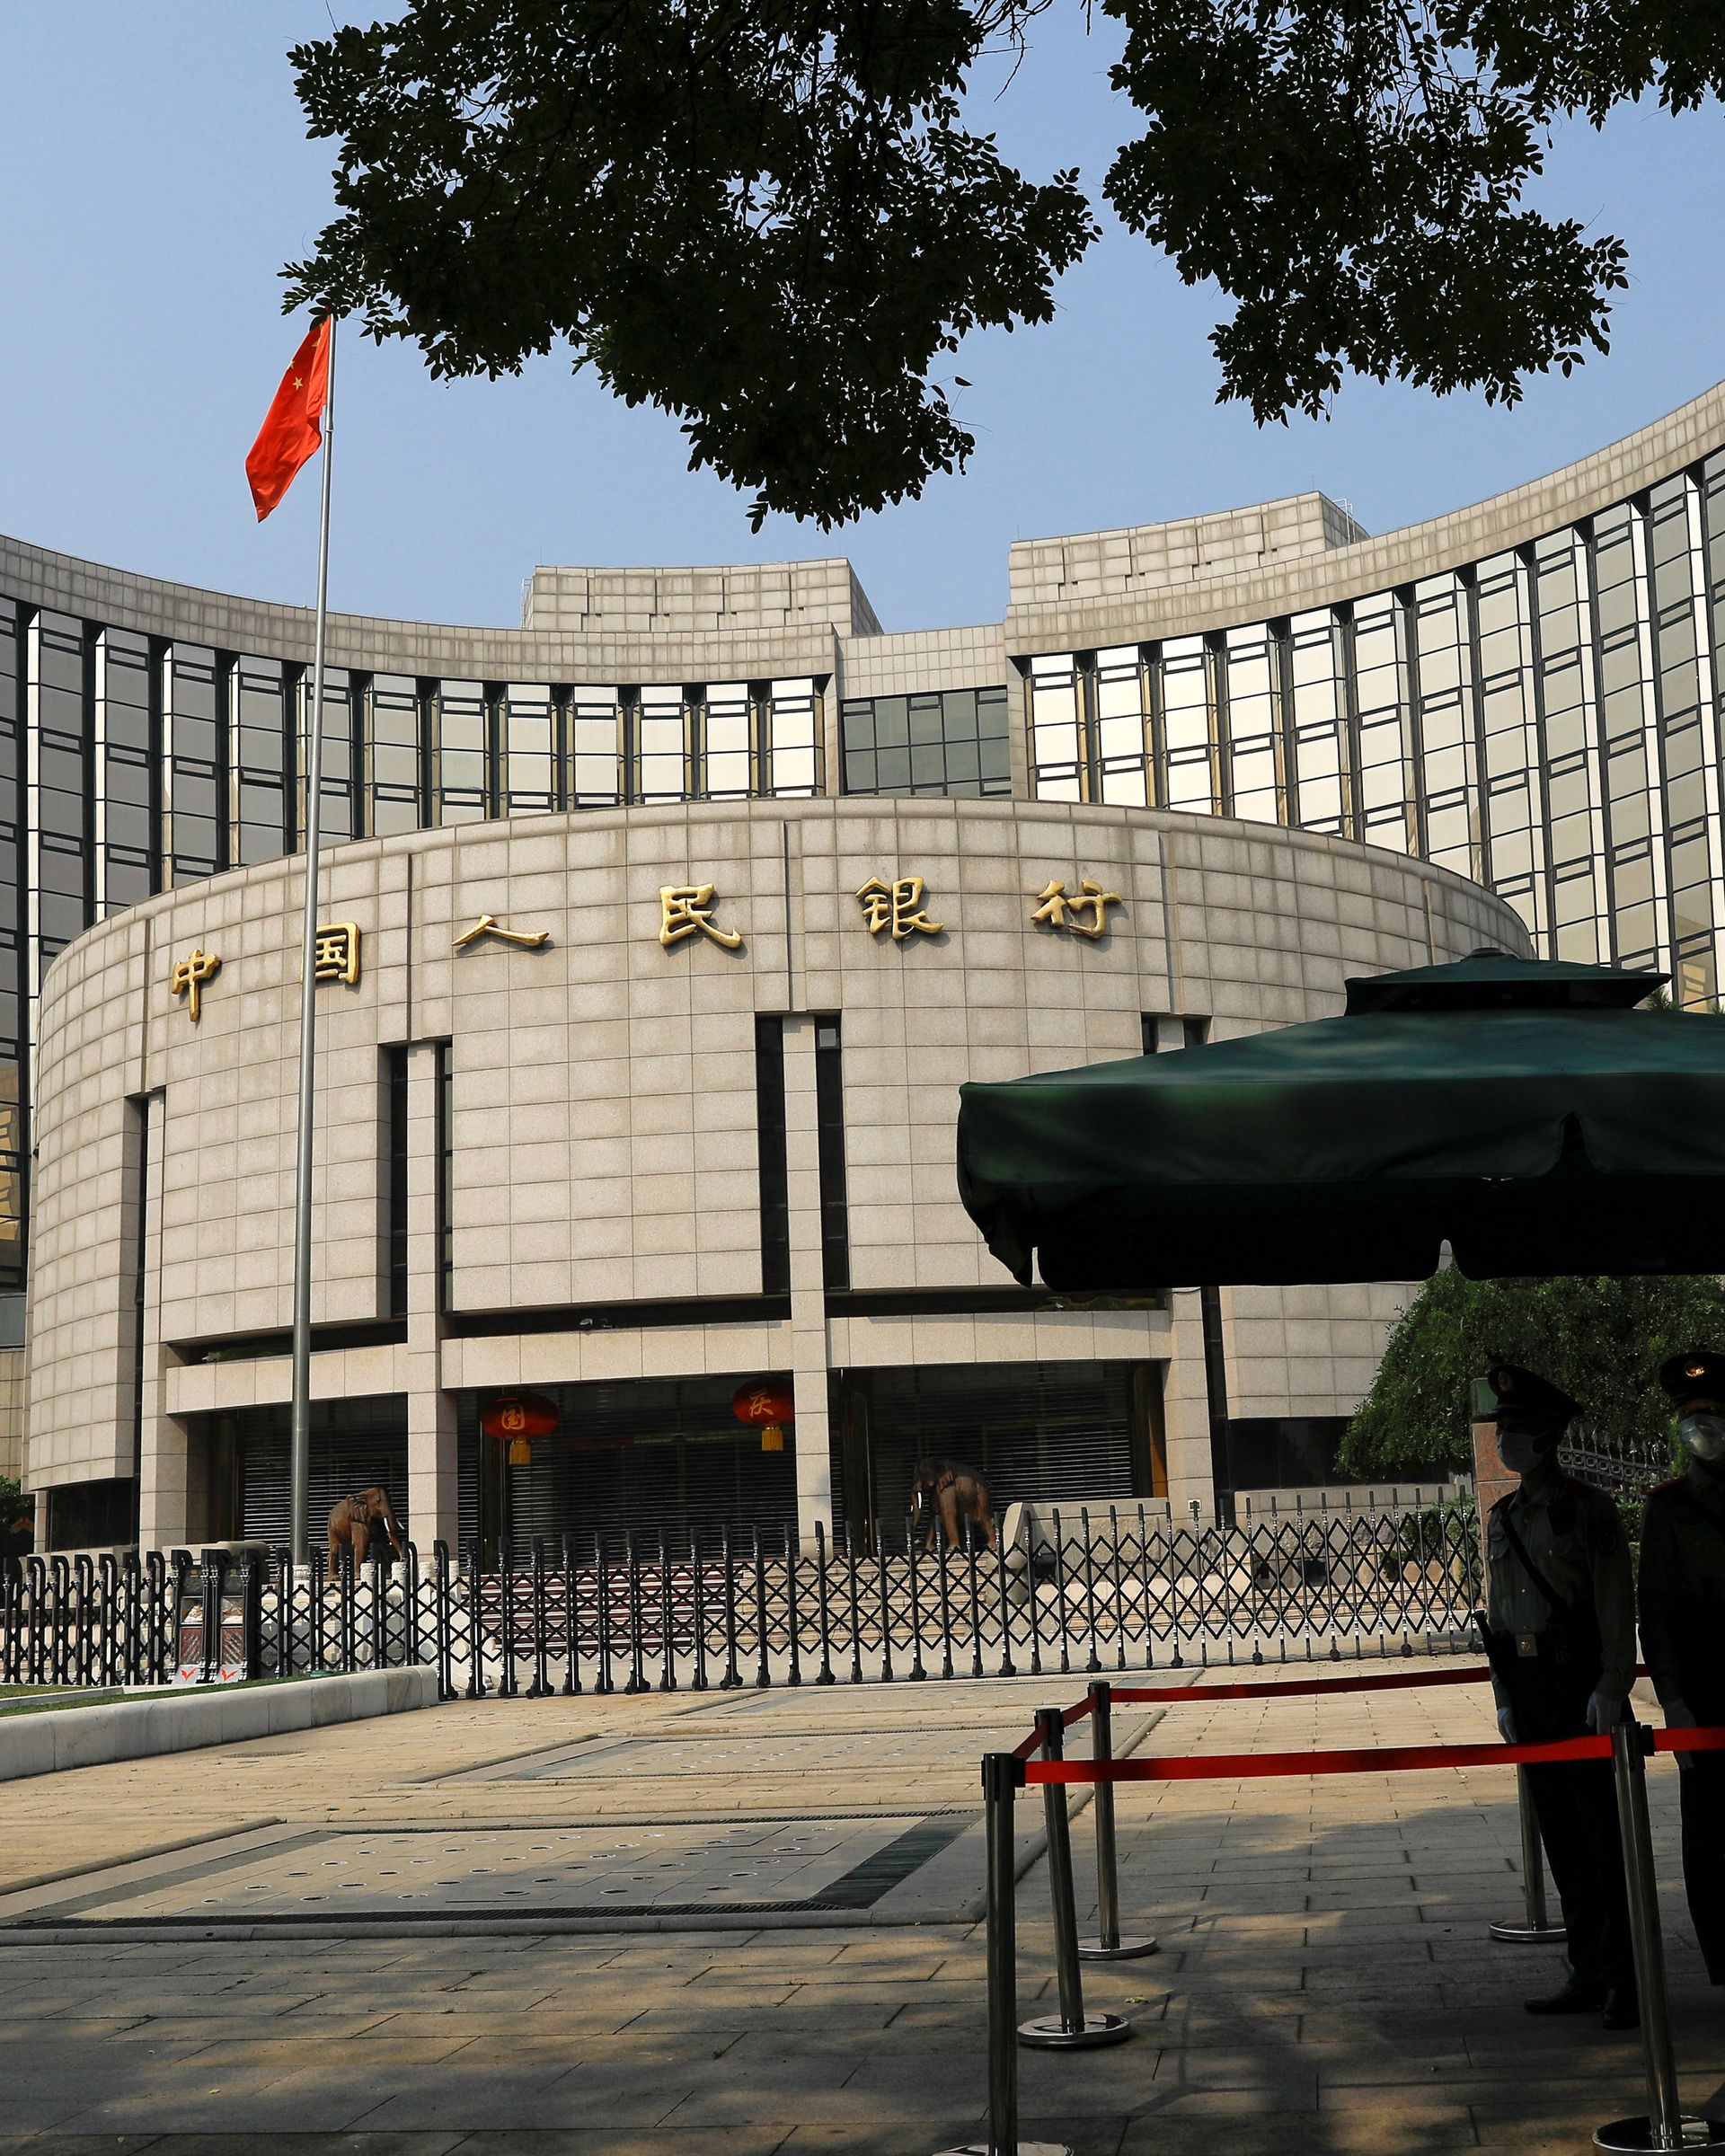 China central bank unexpectedly cuts rates to support economy